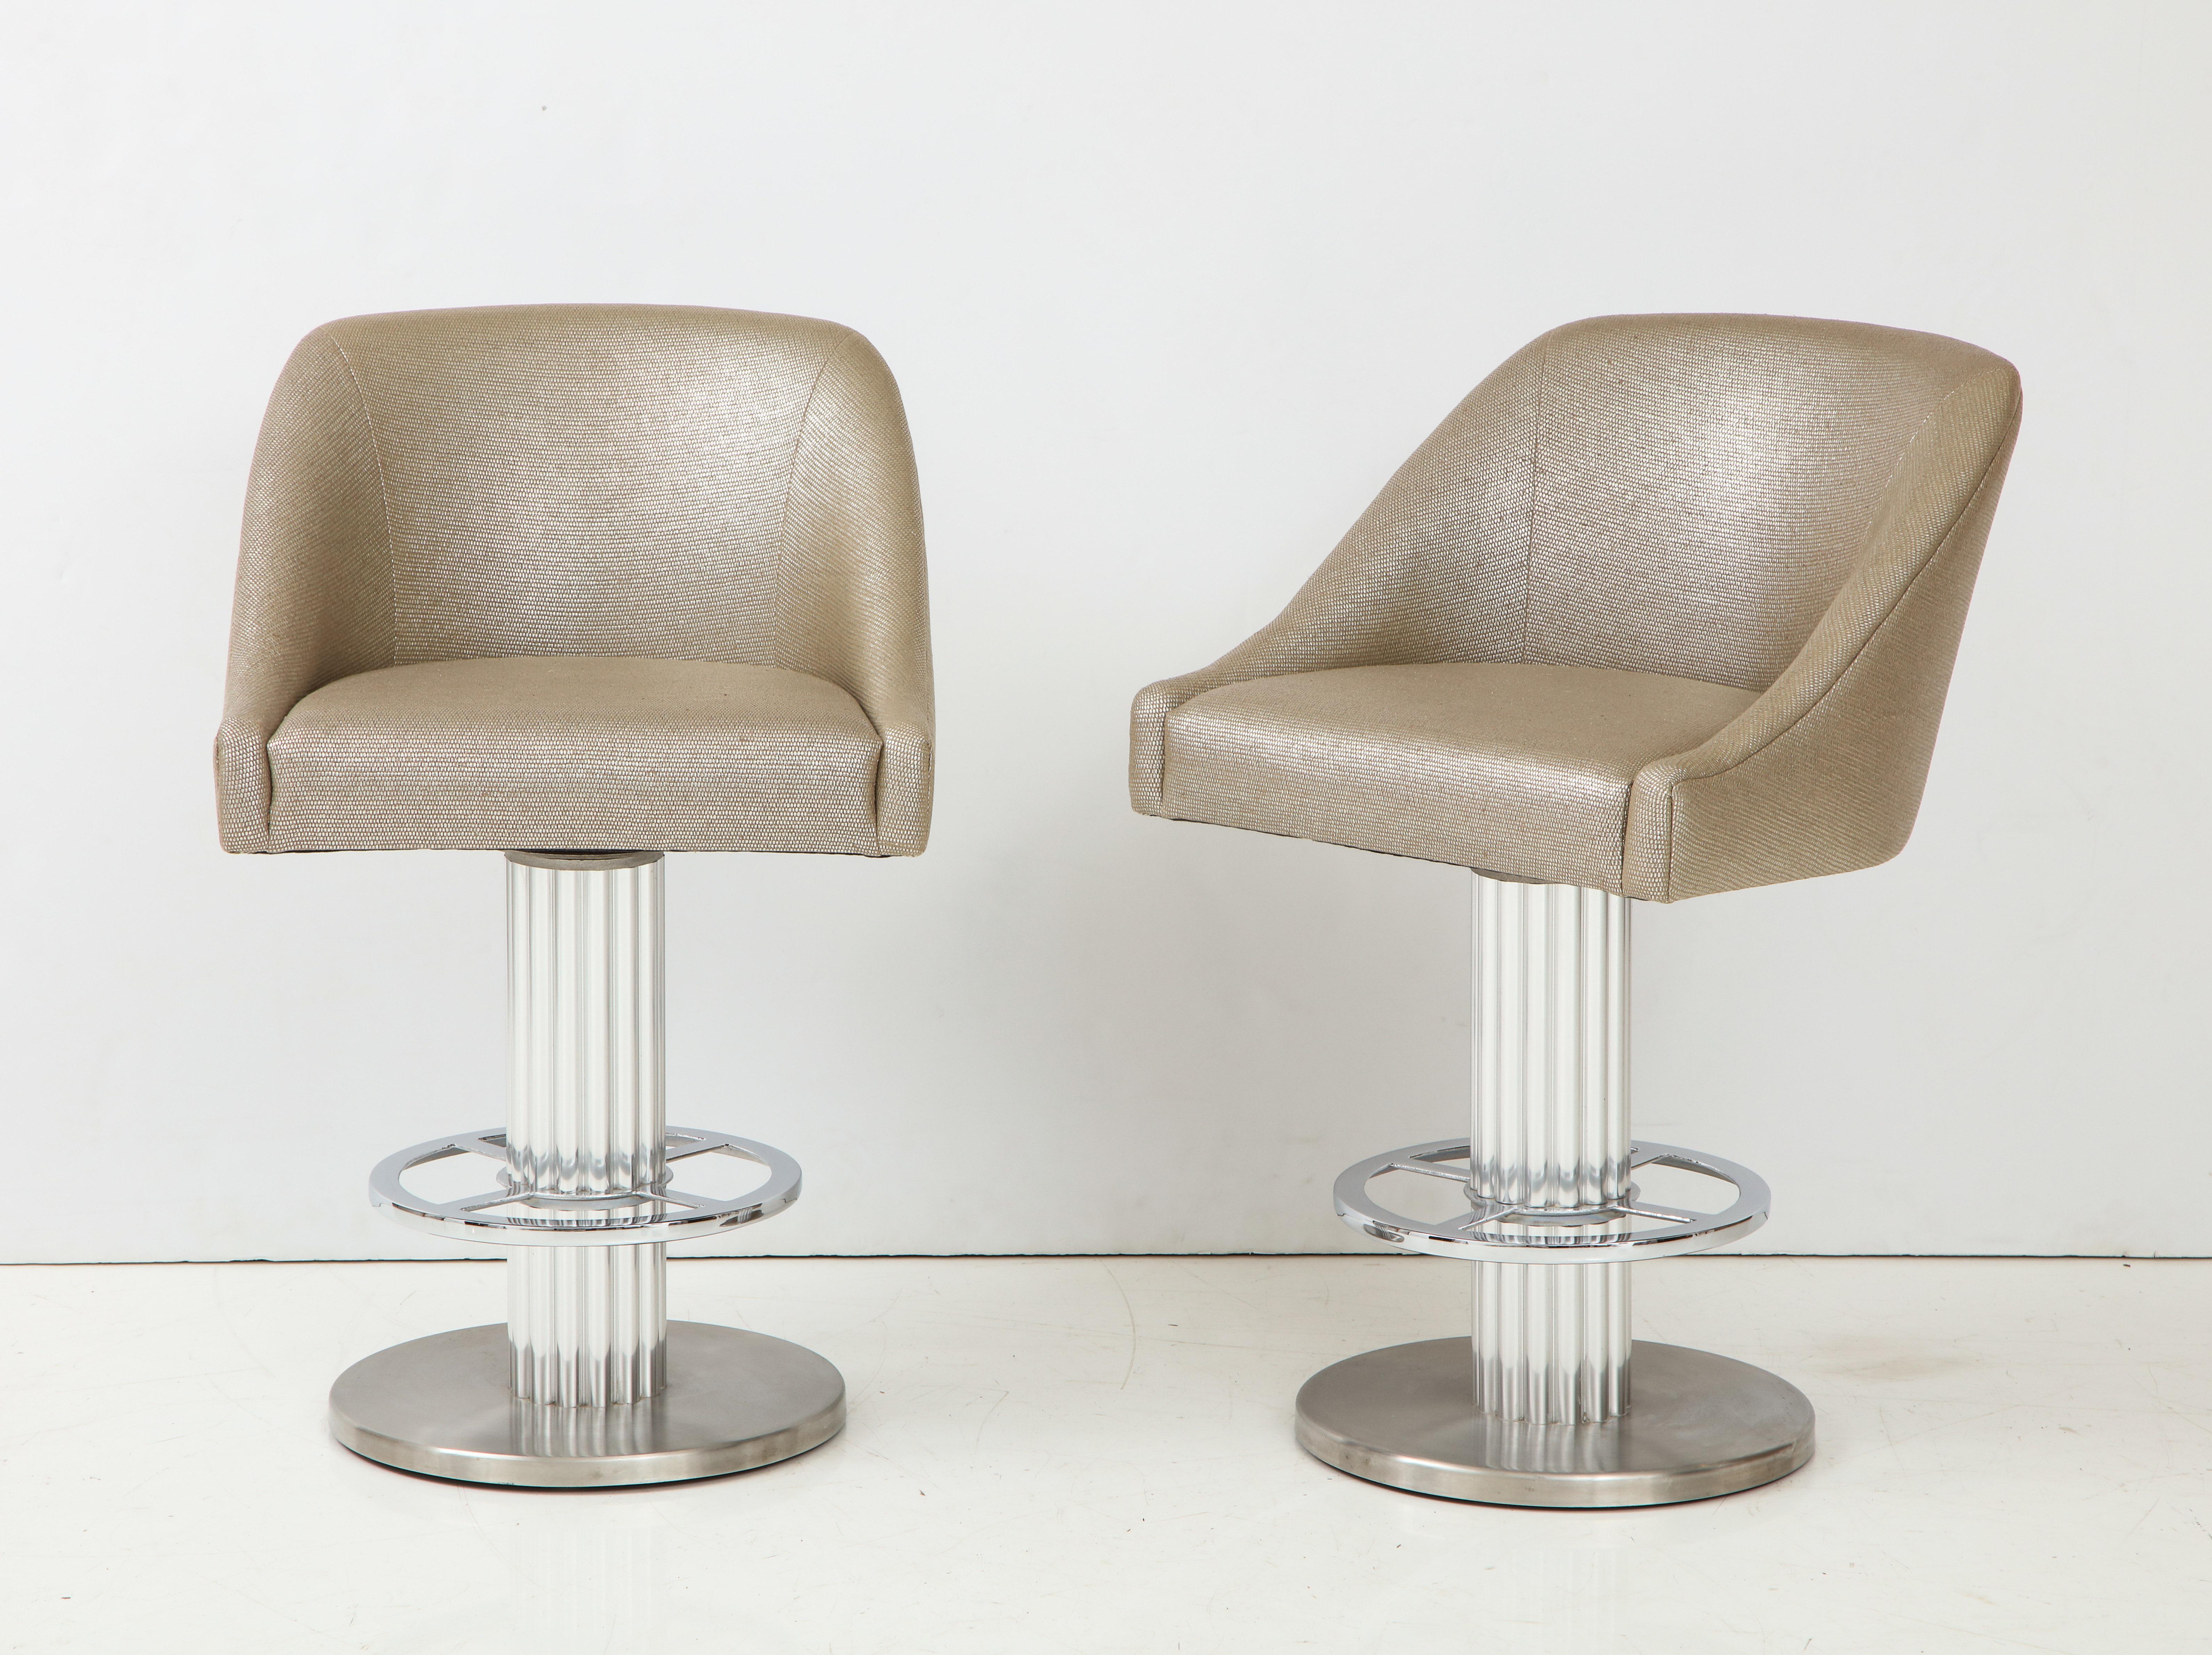 Modern Pair of Designs for Leisure Bar Stools